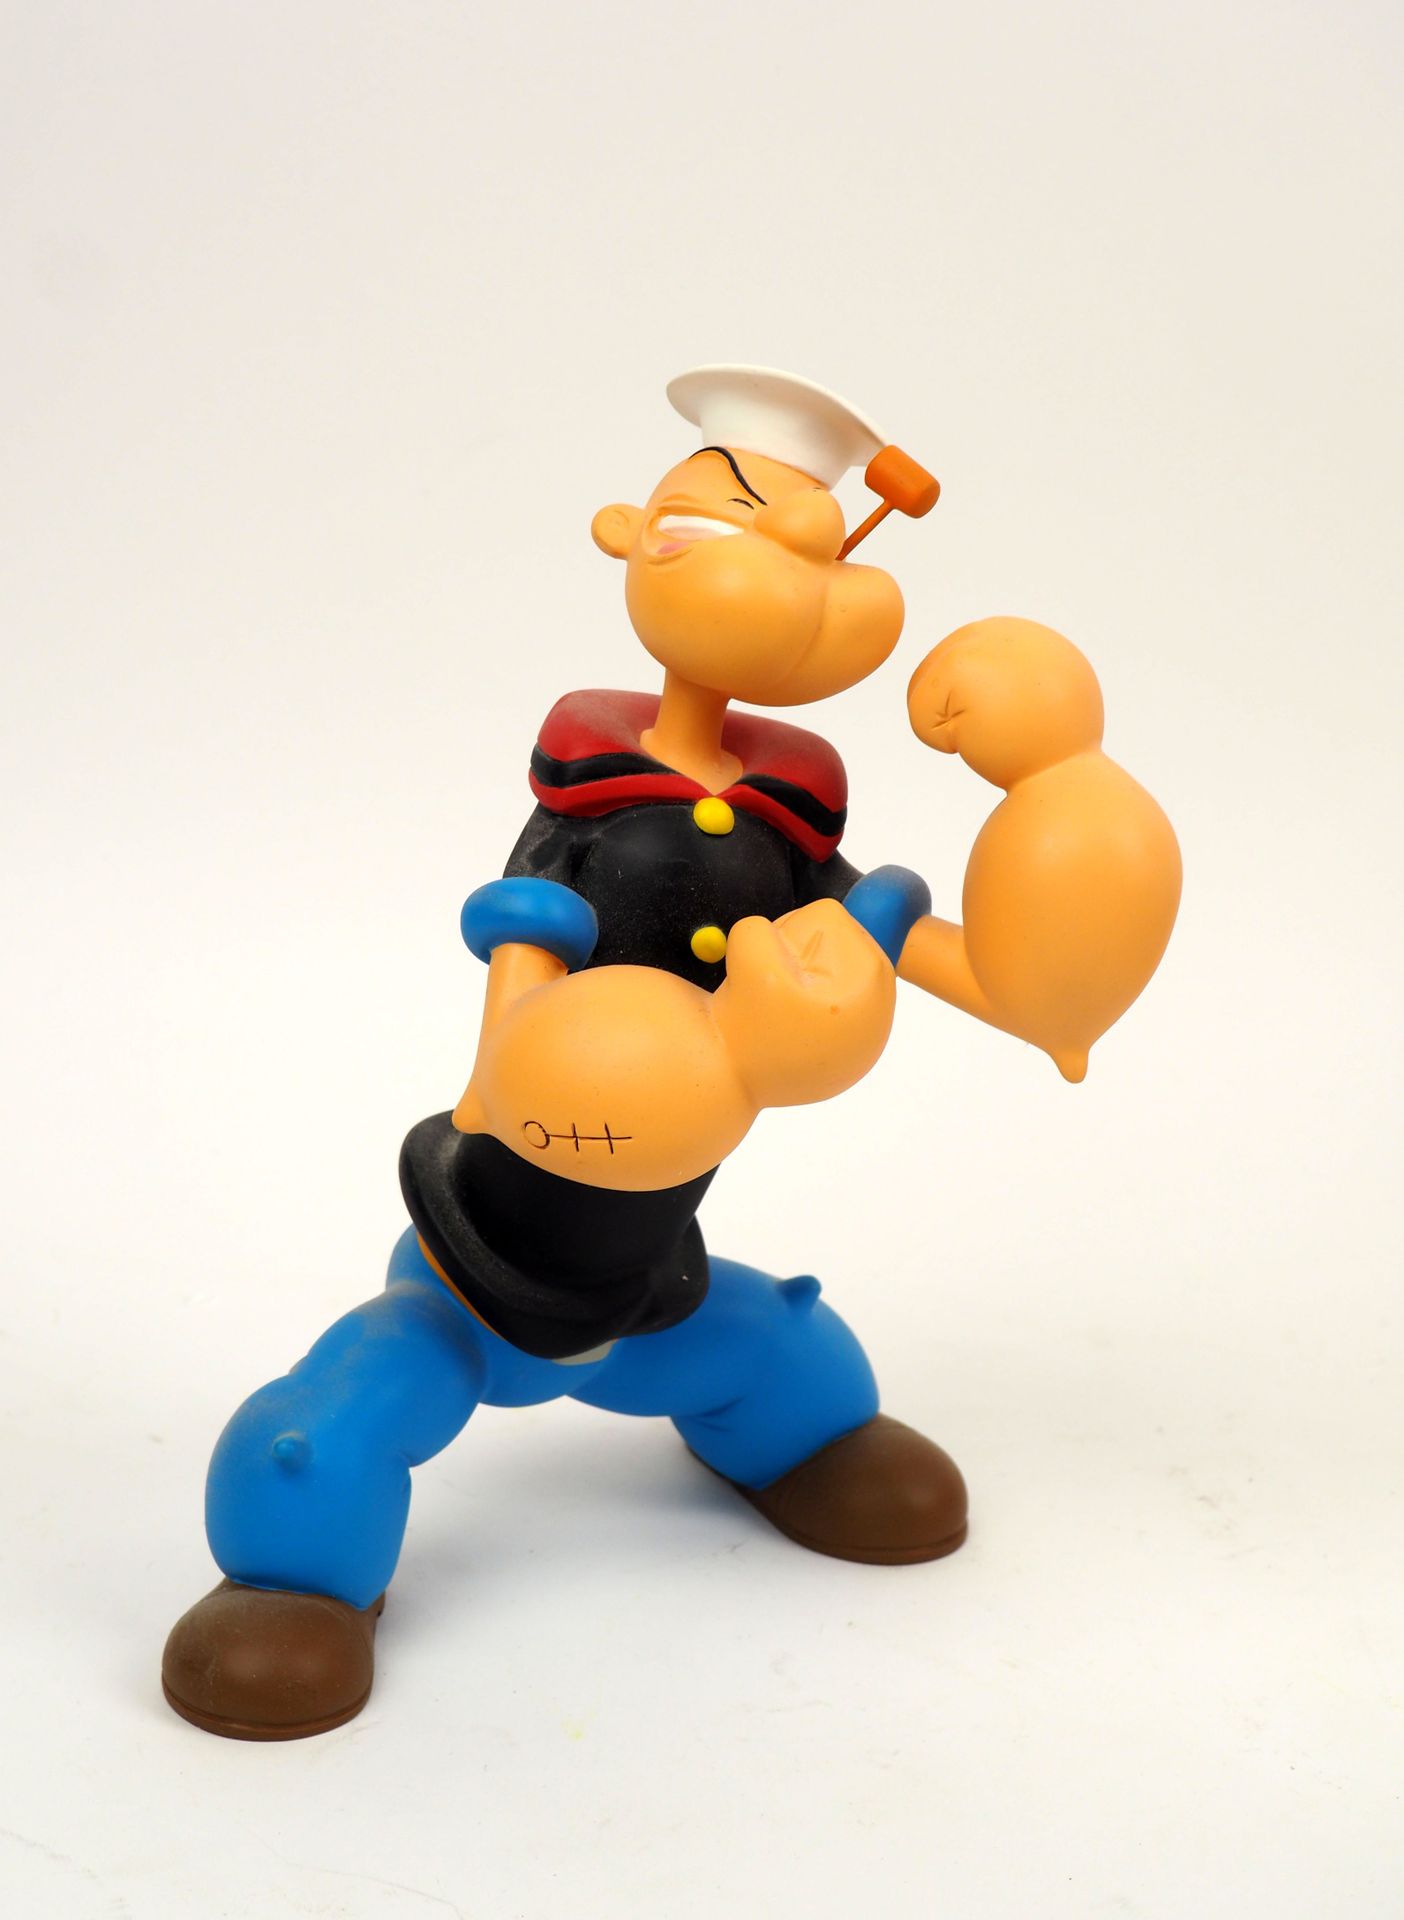 Null POPEYE
Statuette edited by Leblon Delienne, limited edition of 999 copies
(&hellip;